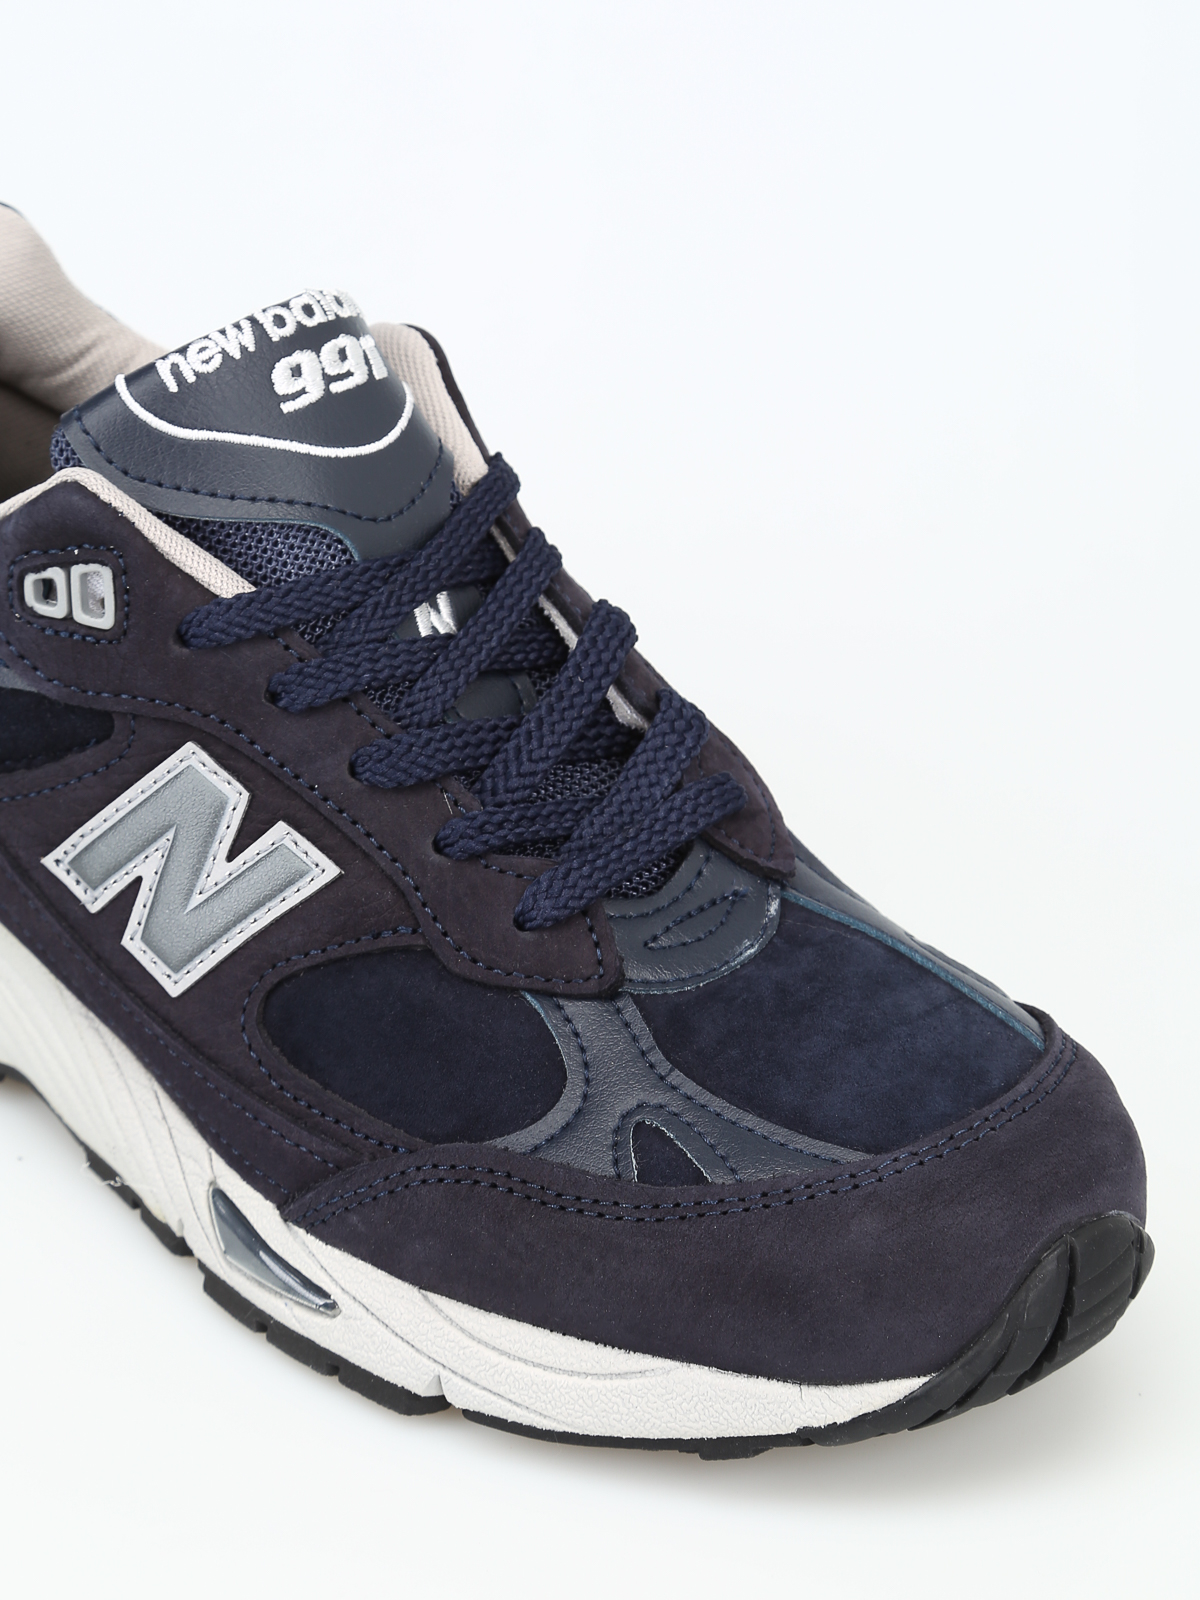 Trainers New Balance - 991 dark blue low top sneakers - M991NPN